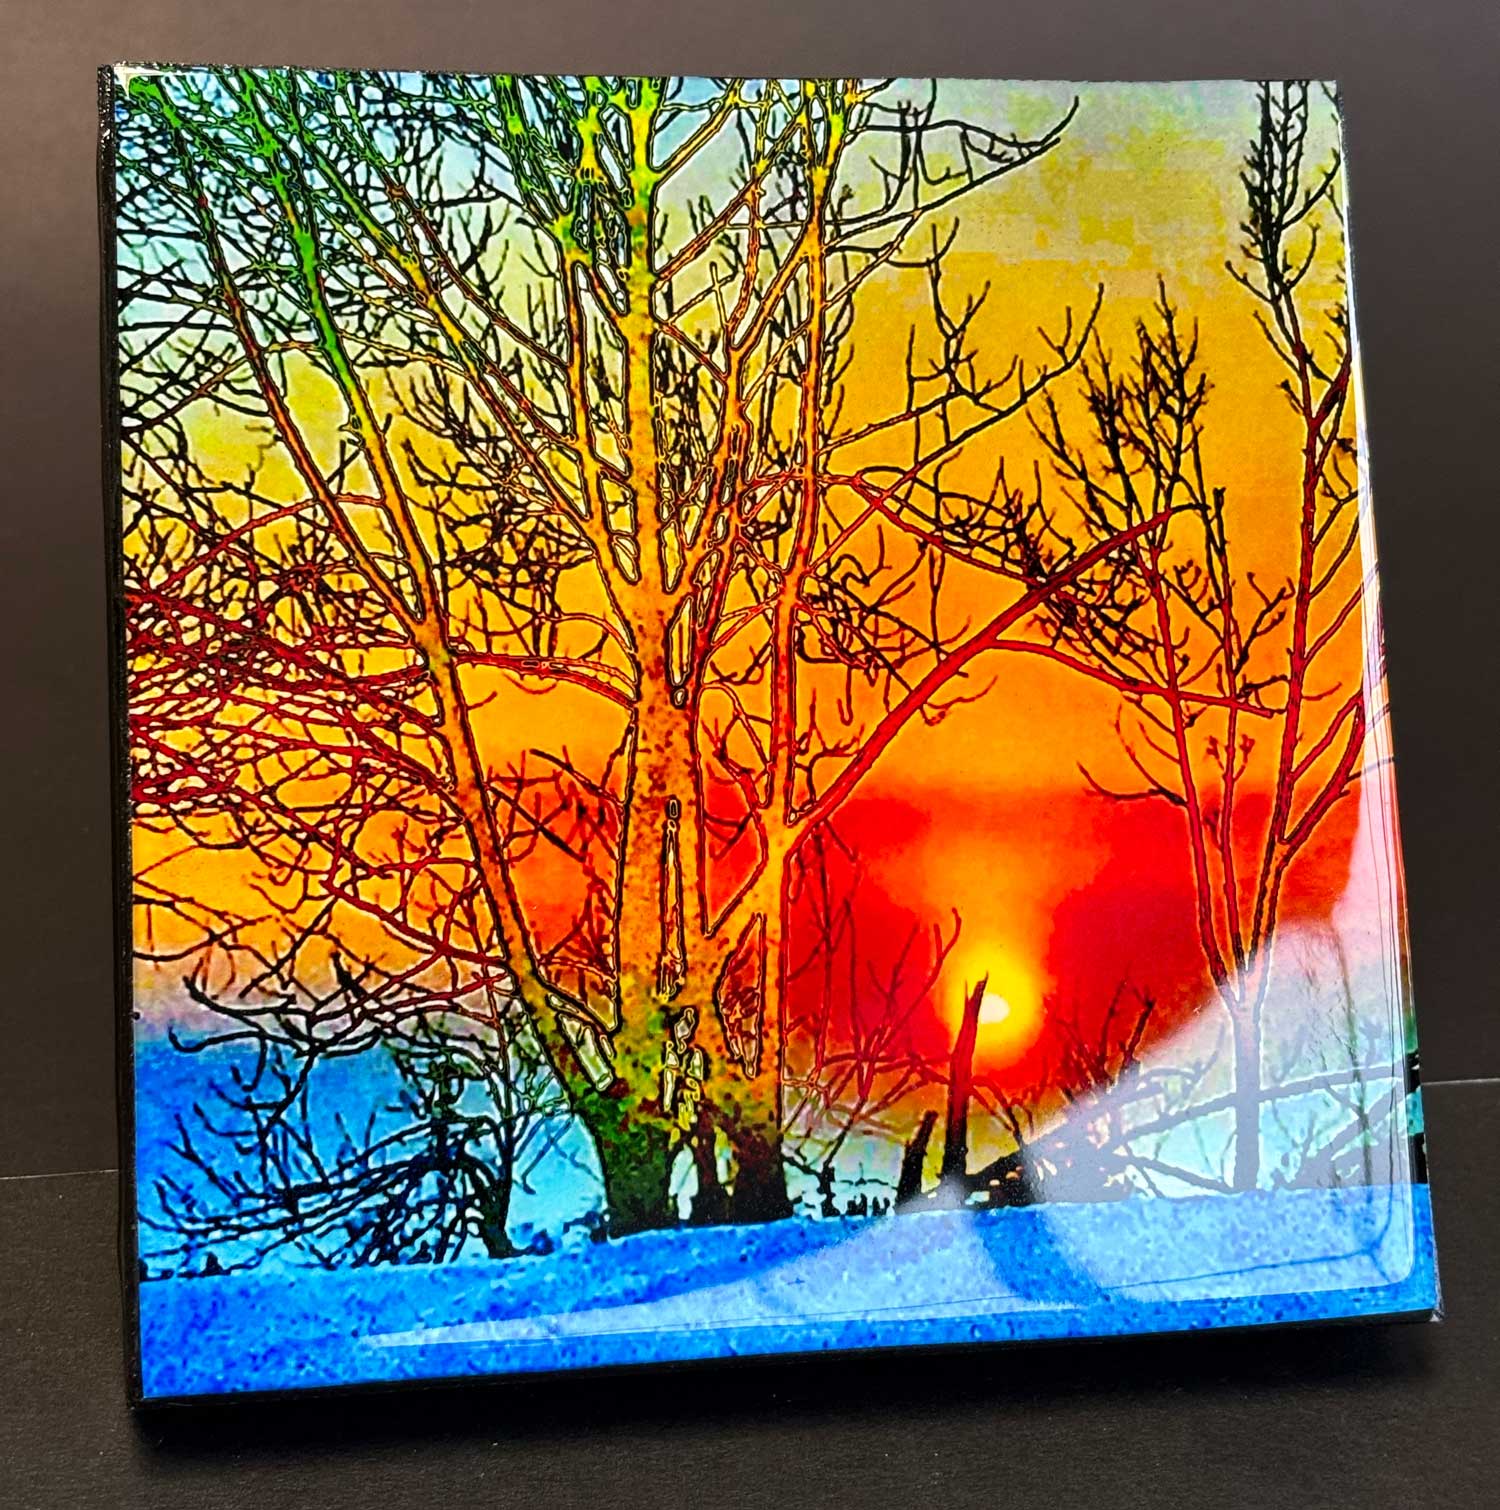 Pictou sunset, Nova Scotia This 6 x 6 inches photography is resin-coated and mounted on a wooden stand, ready to be installed in the room of your choice.